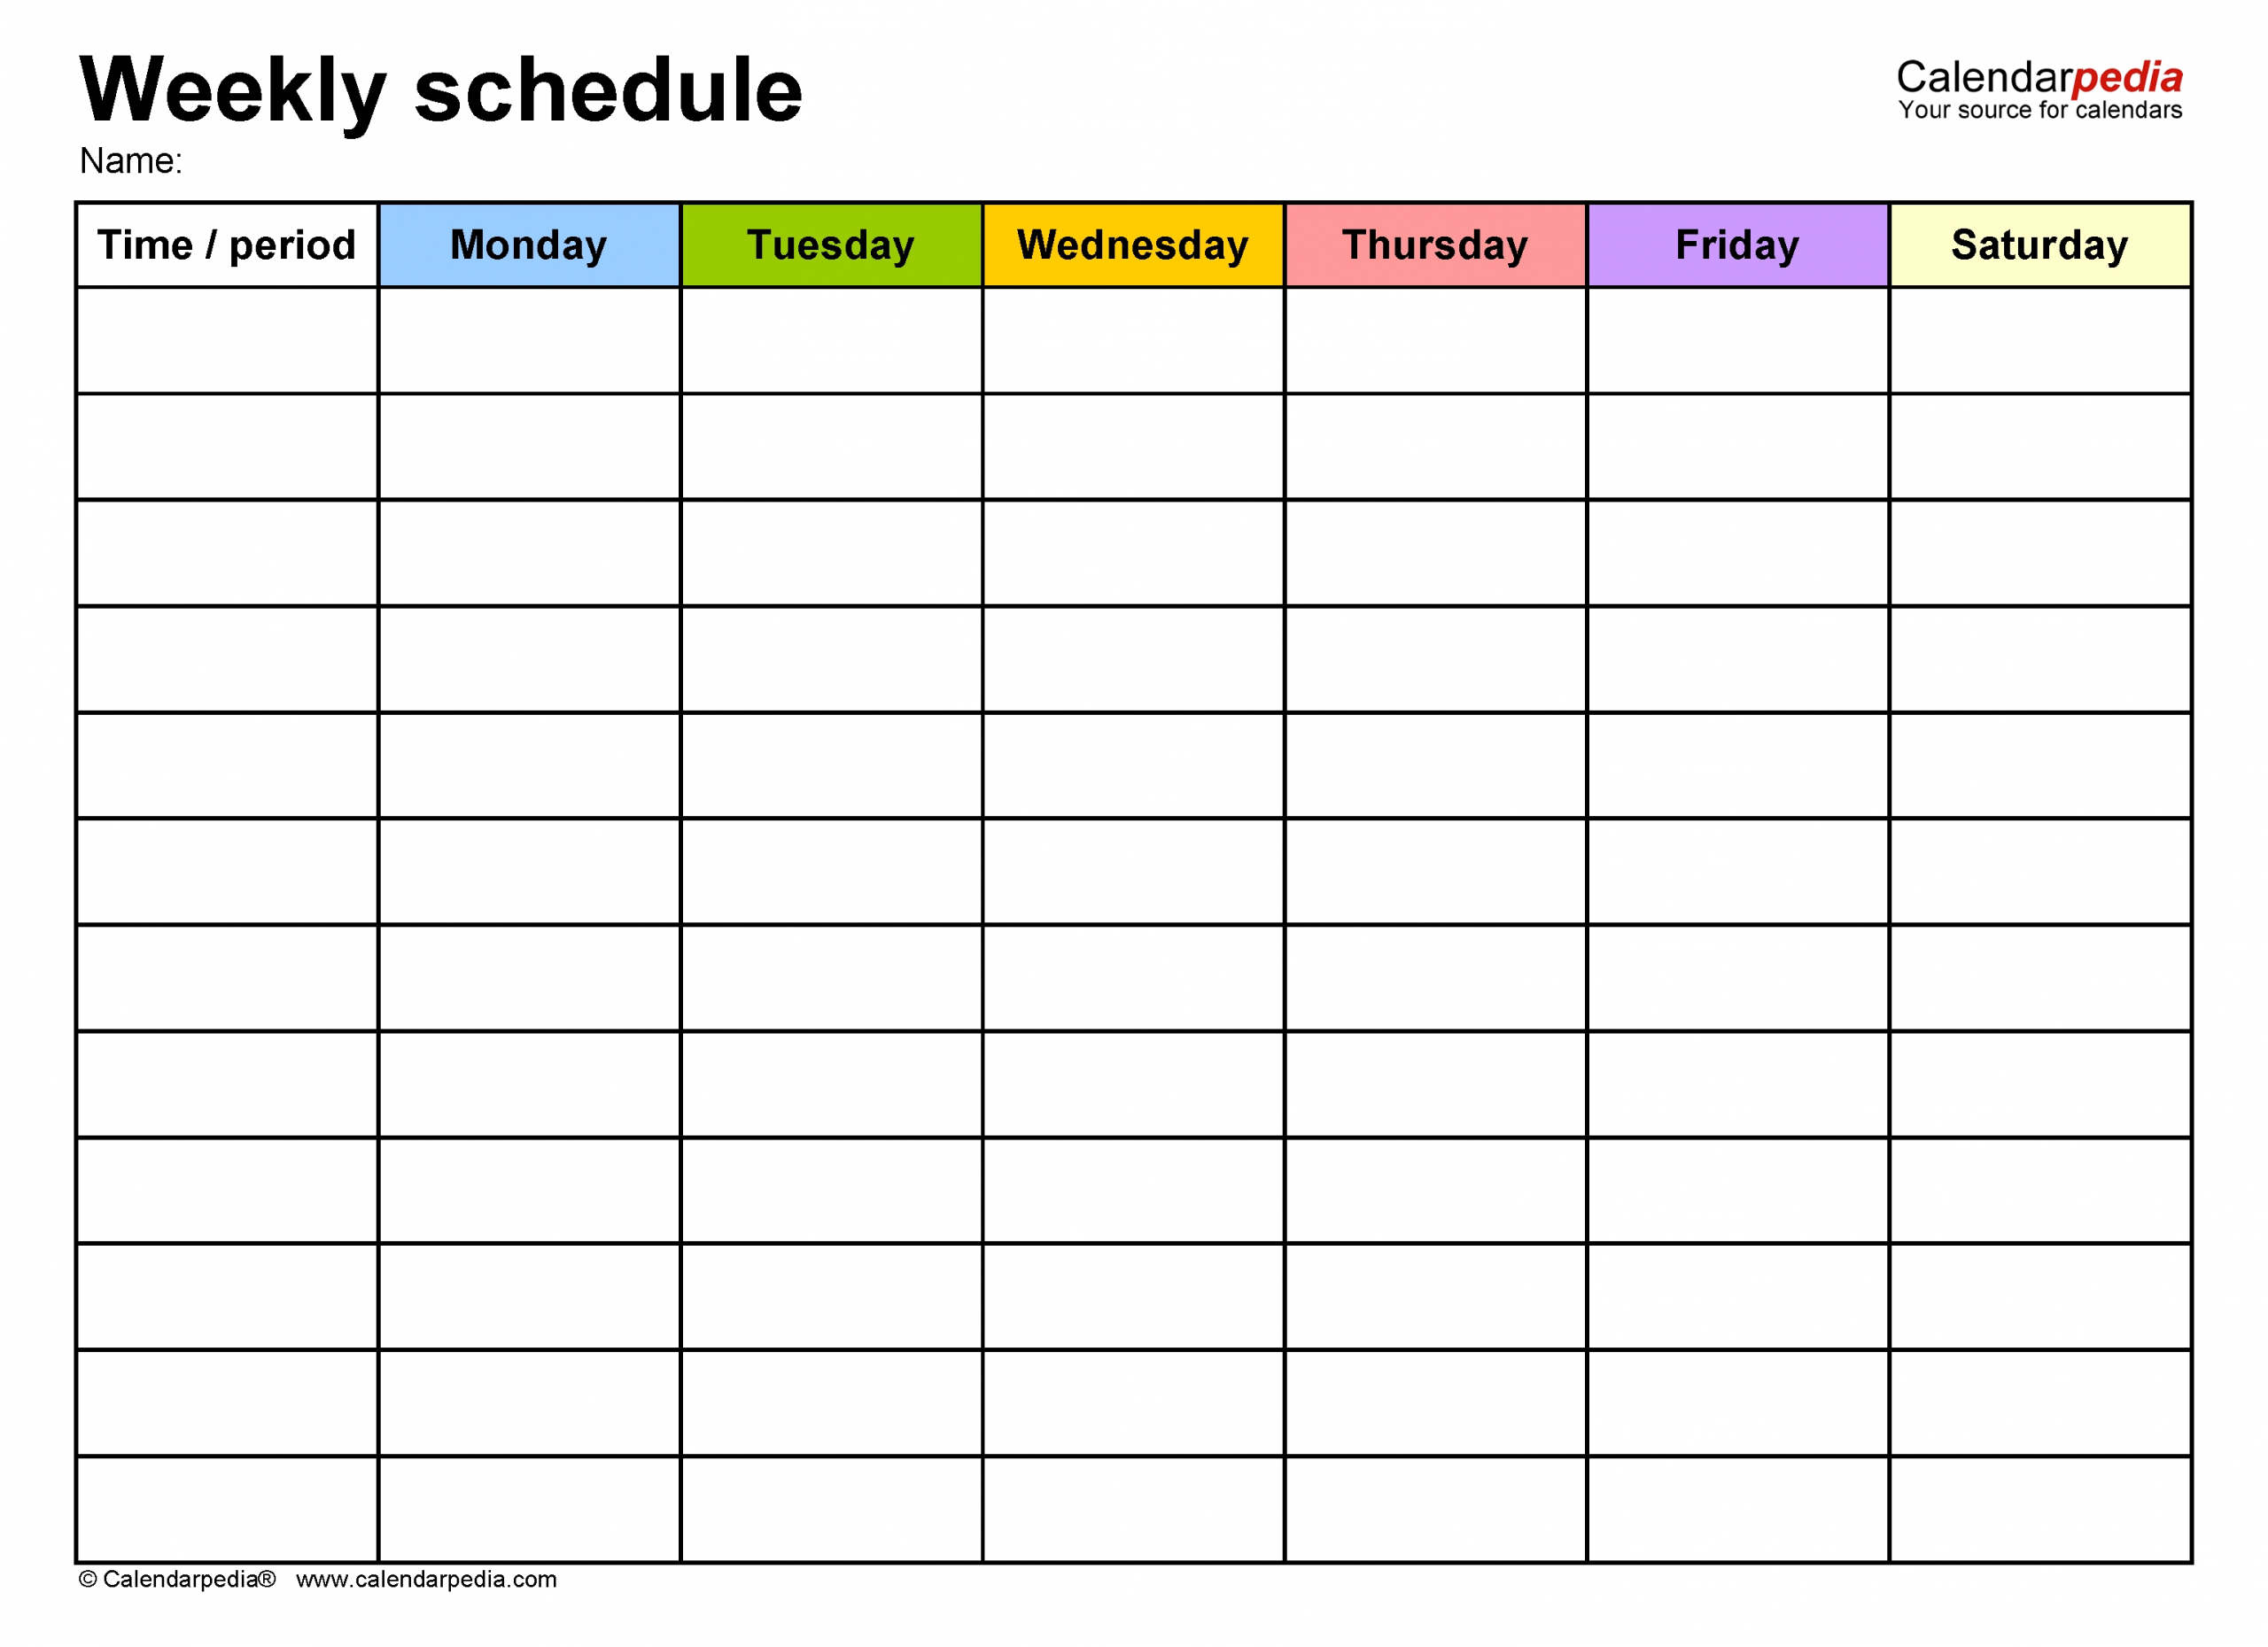 Catch Schedule For 4 People 6 Tasks Monday To Friday